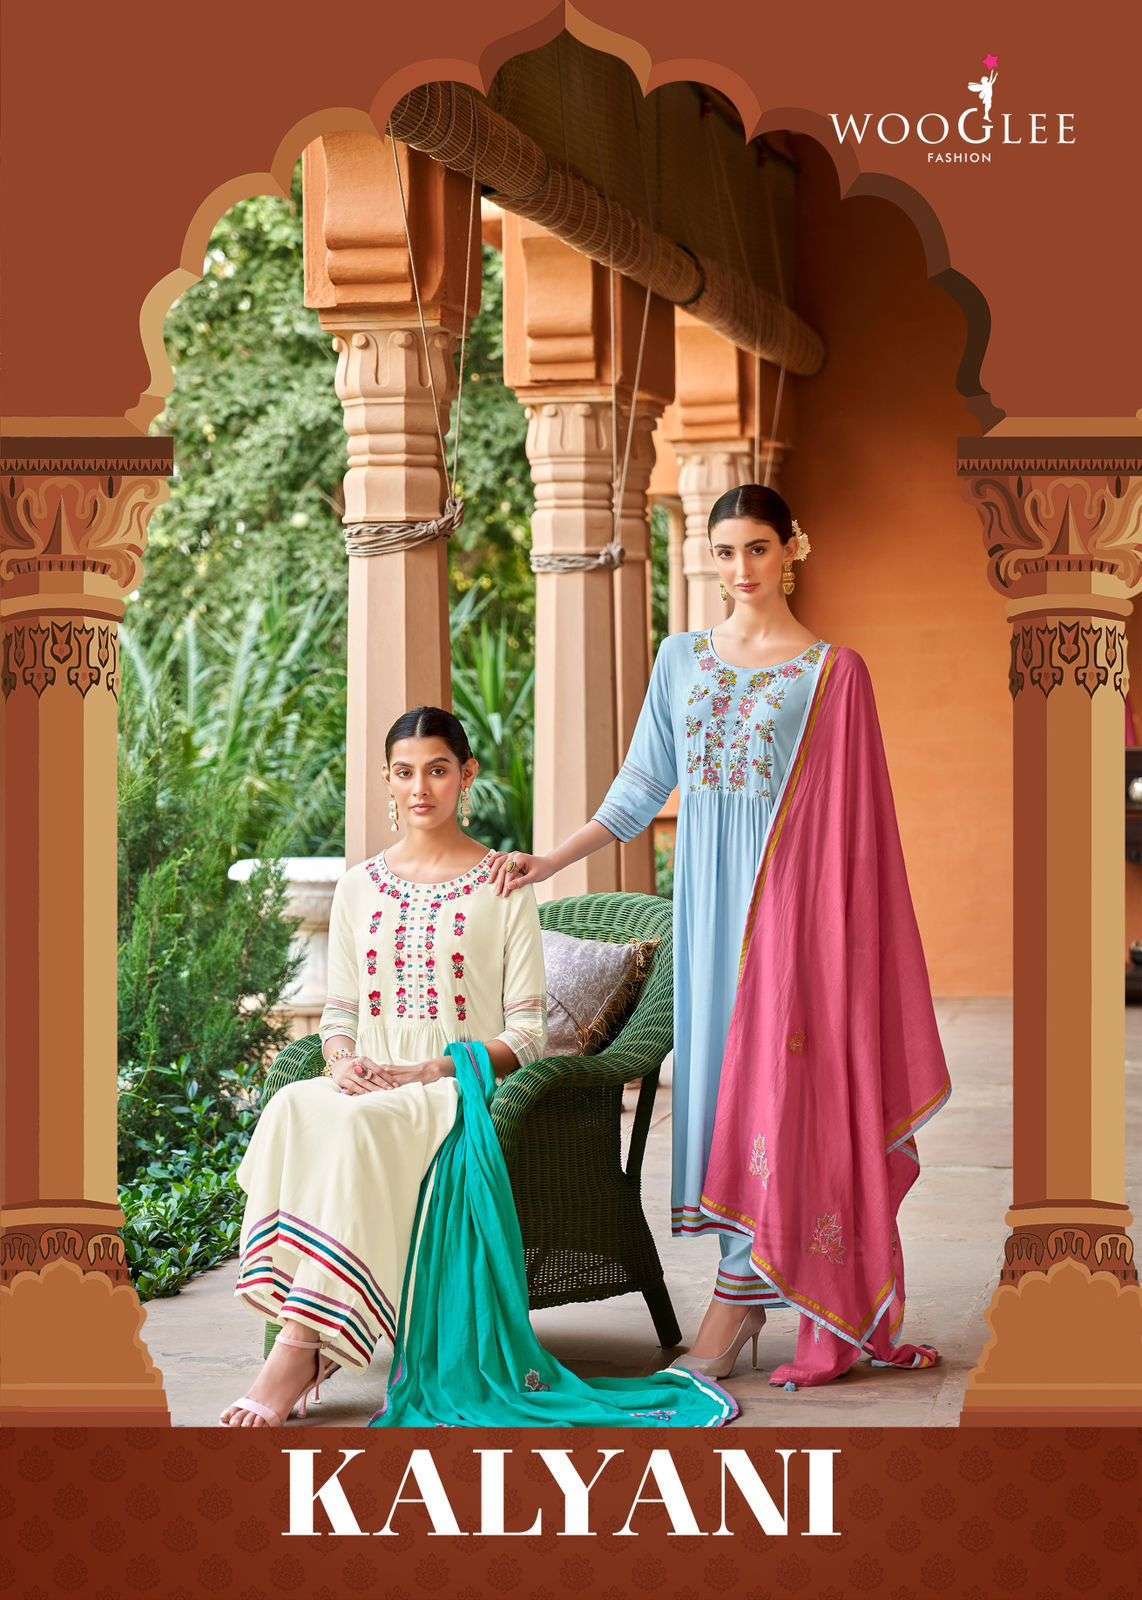 WOOGLEE KALYANI COTTON WITH FANCY EMBROIDERY NECK WORK READYMADE SUITS 